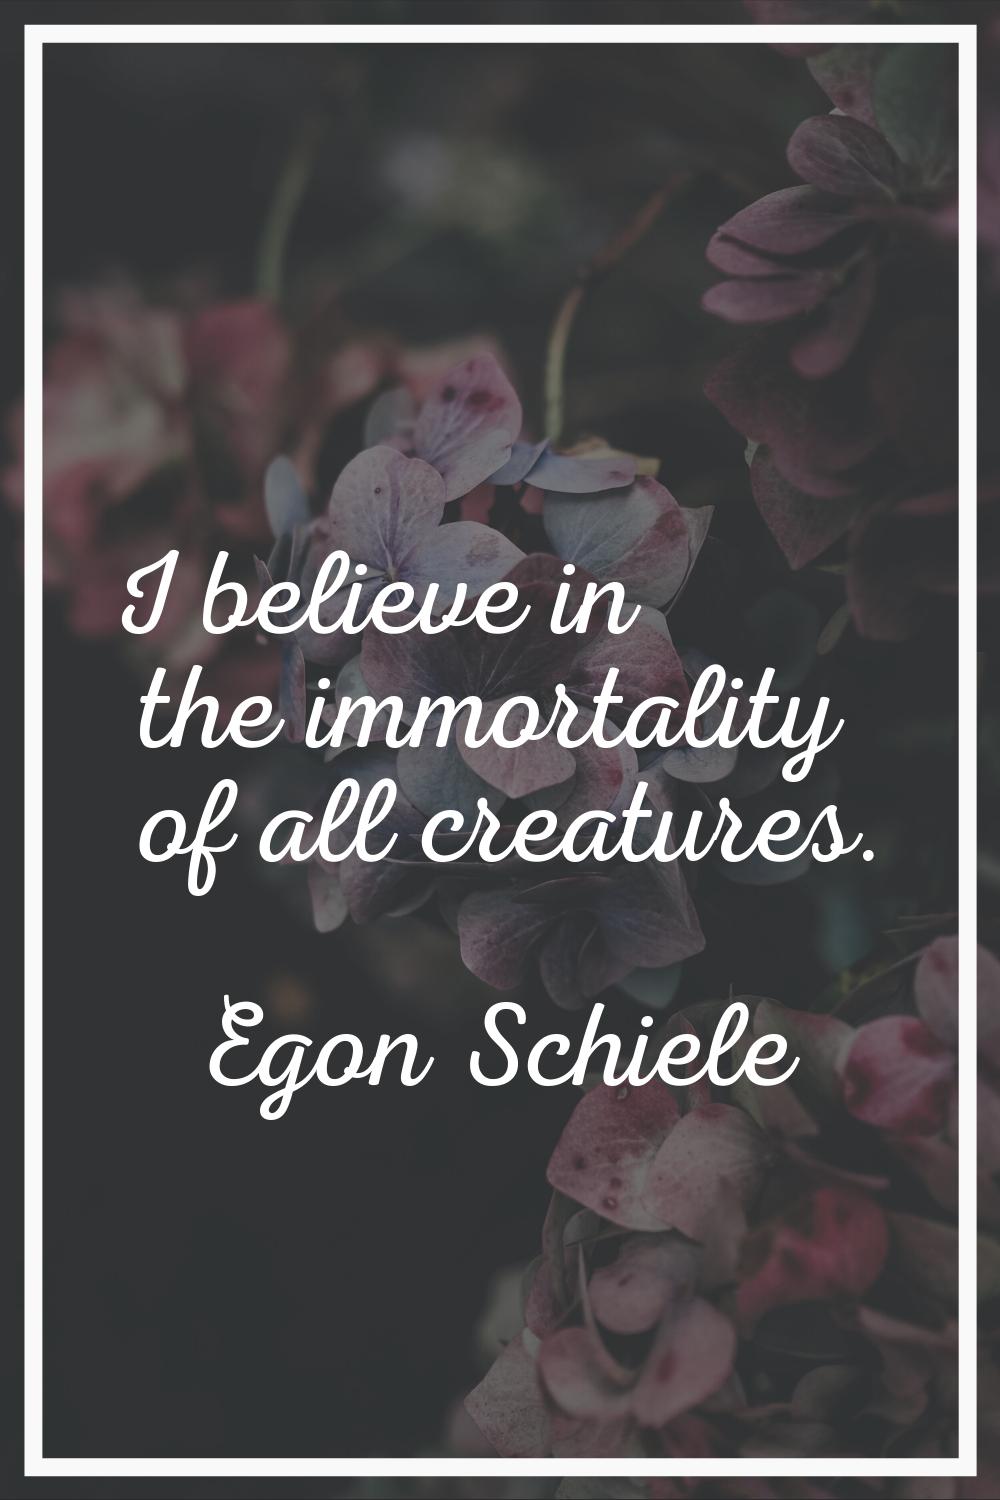 I believe in the immortality of all creatures.